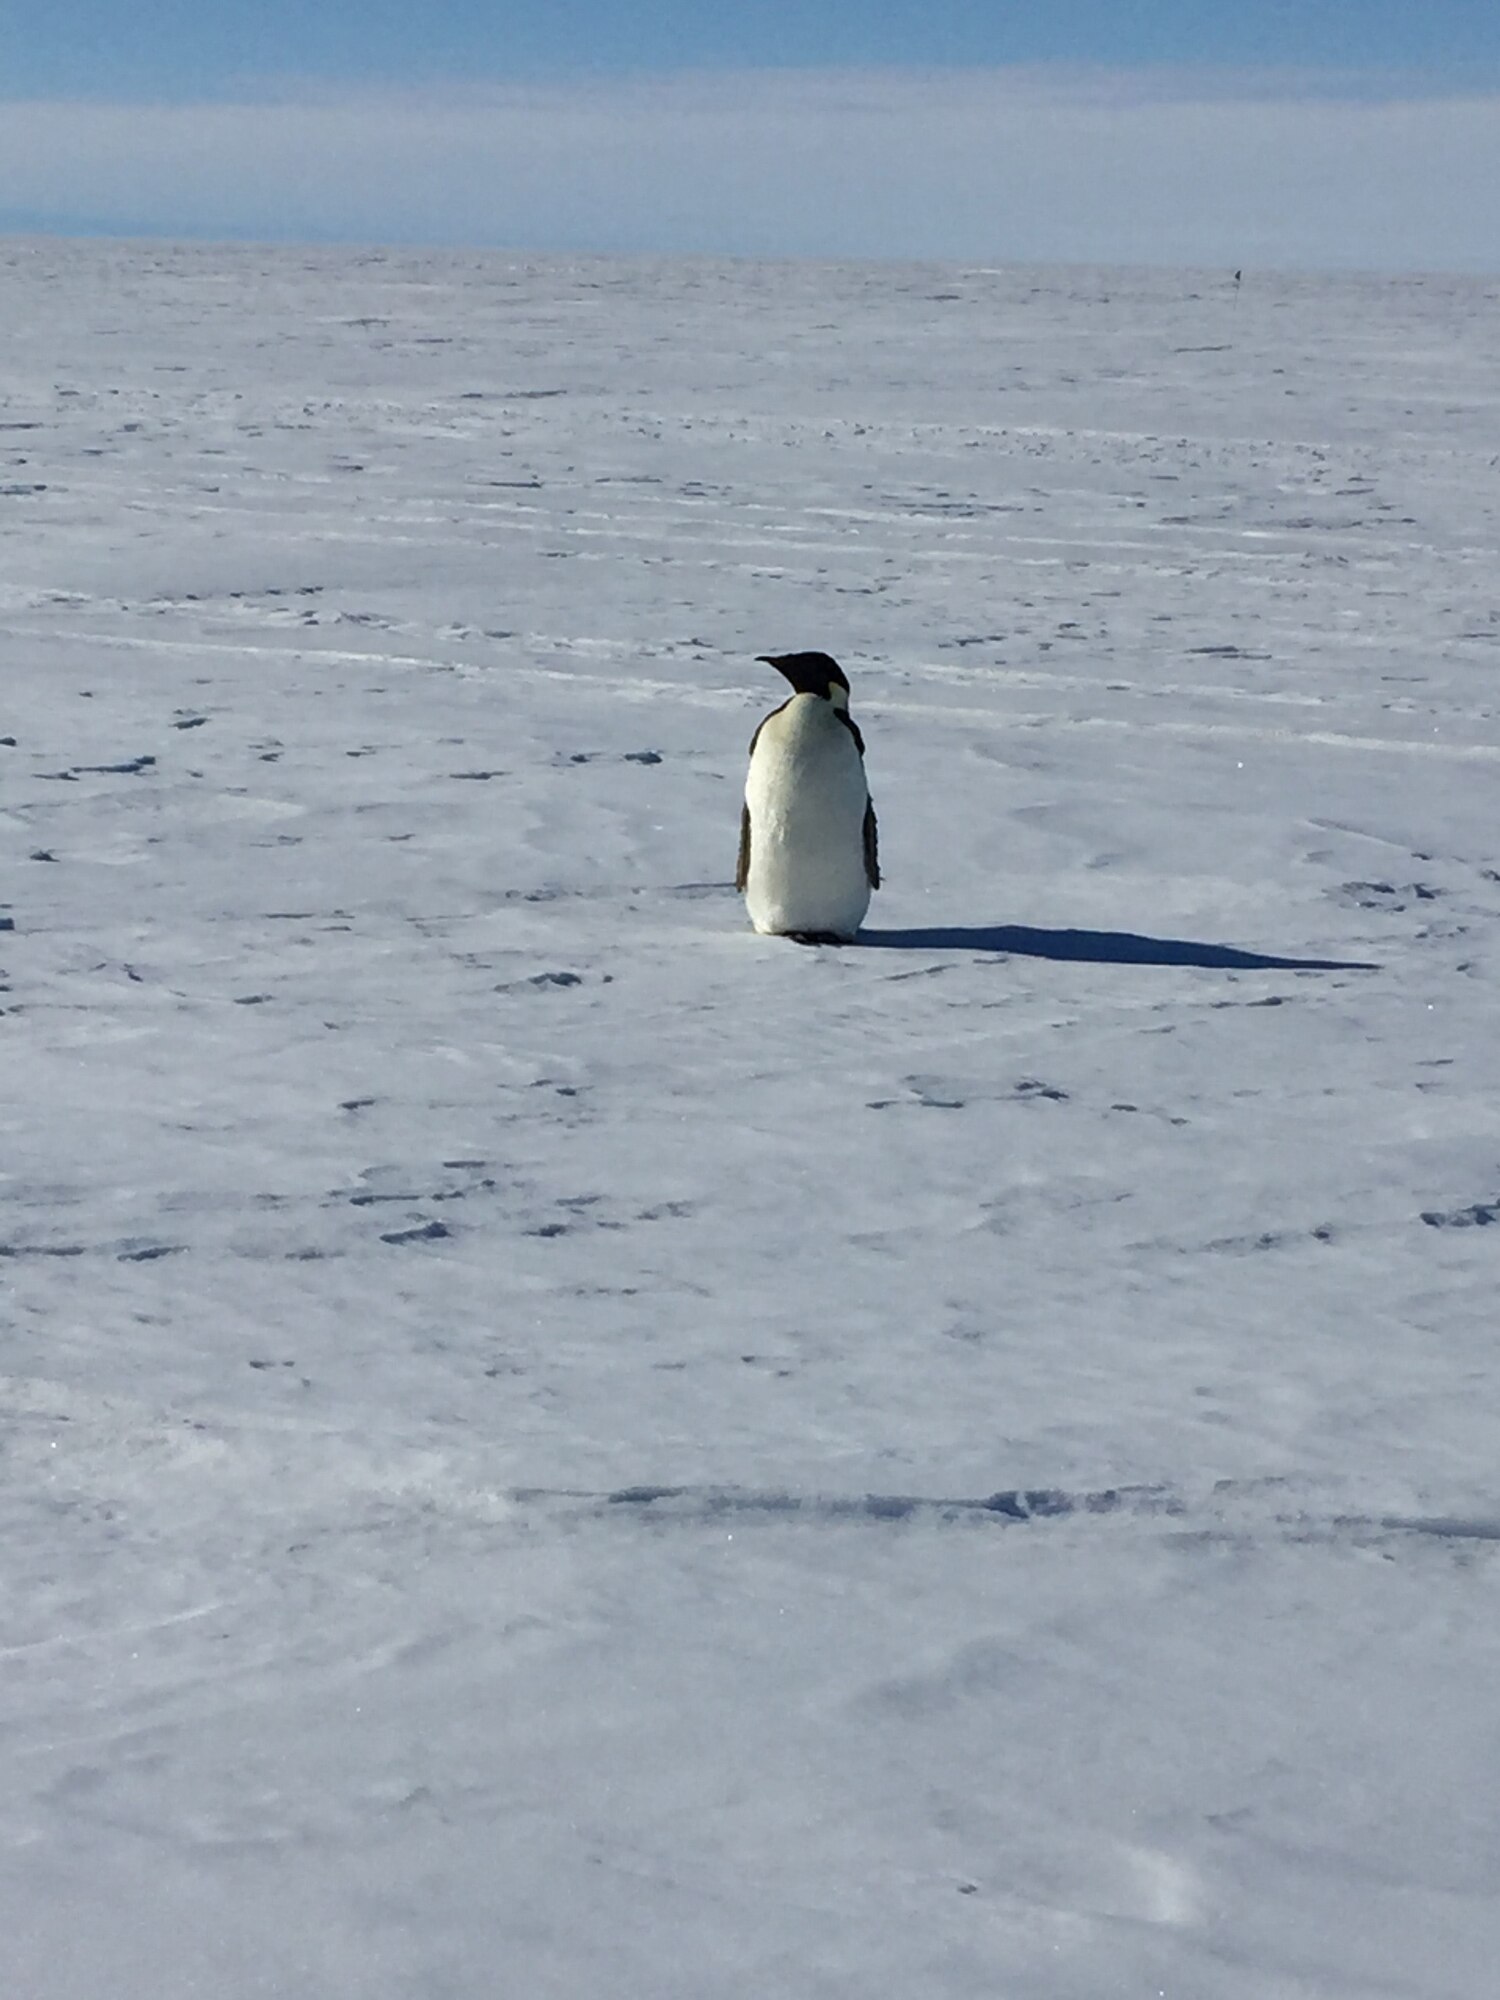 Chief Master Sgt. James Masura Jr., 313th Airlift Squadron loadmaster, took a photo of his very first penguin sighting on his record setting 100th Operation Deep Freeze mission providing C-17 Globemaster III logistical support the National Science Foundation's Antarctic research stations. (Courtesy photo)